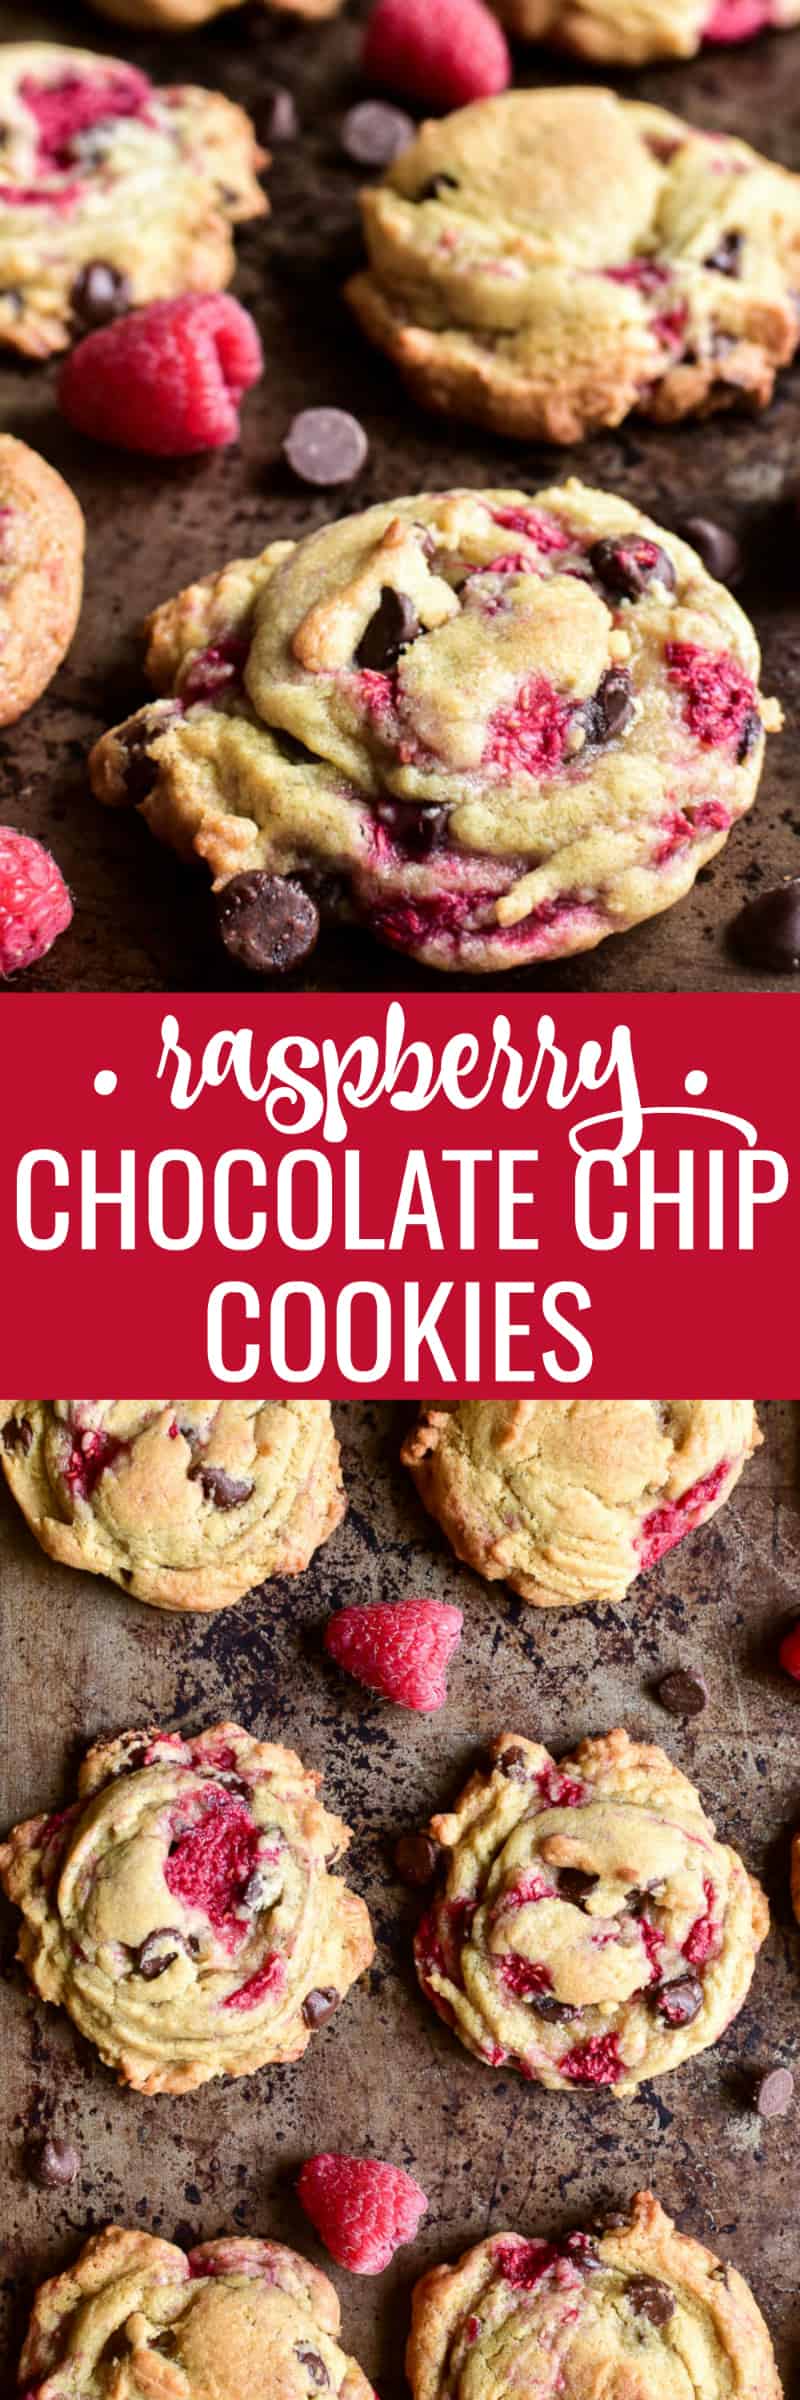 Collage image of Raspberry Chocolate Chip Cookies